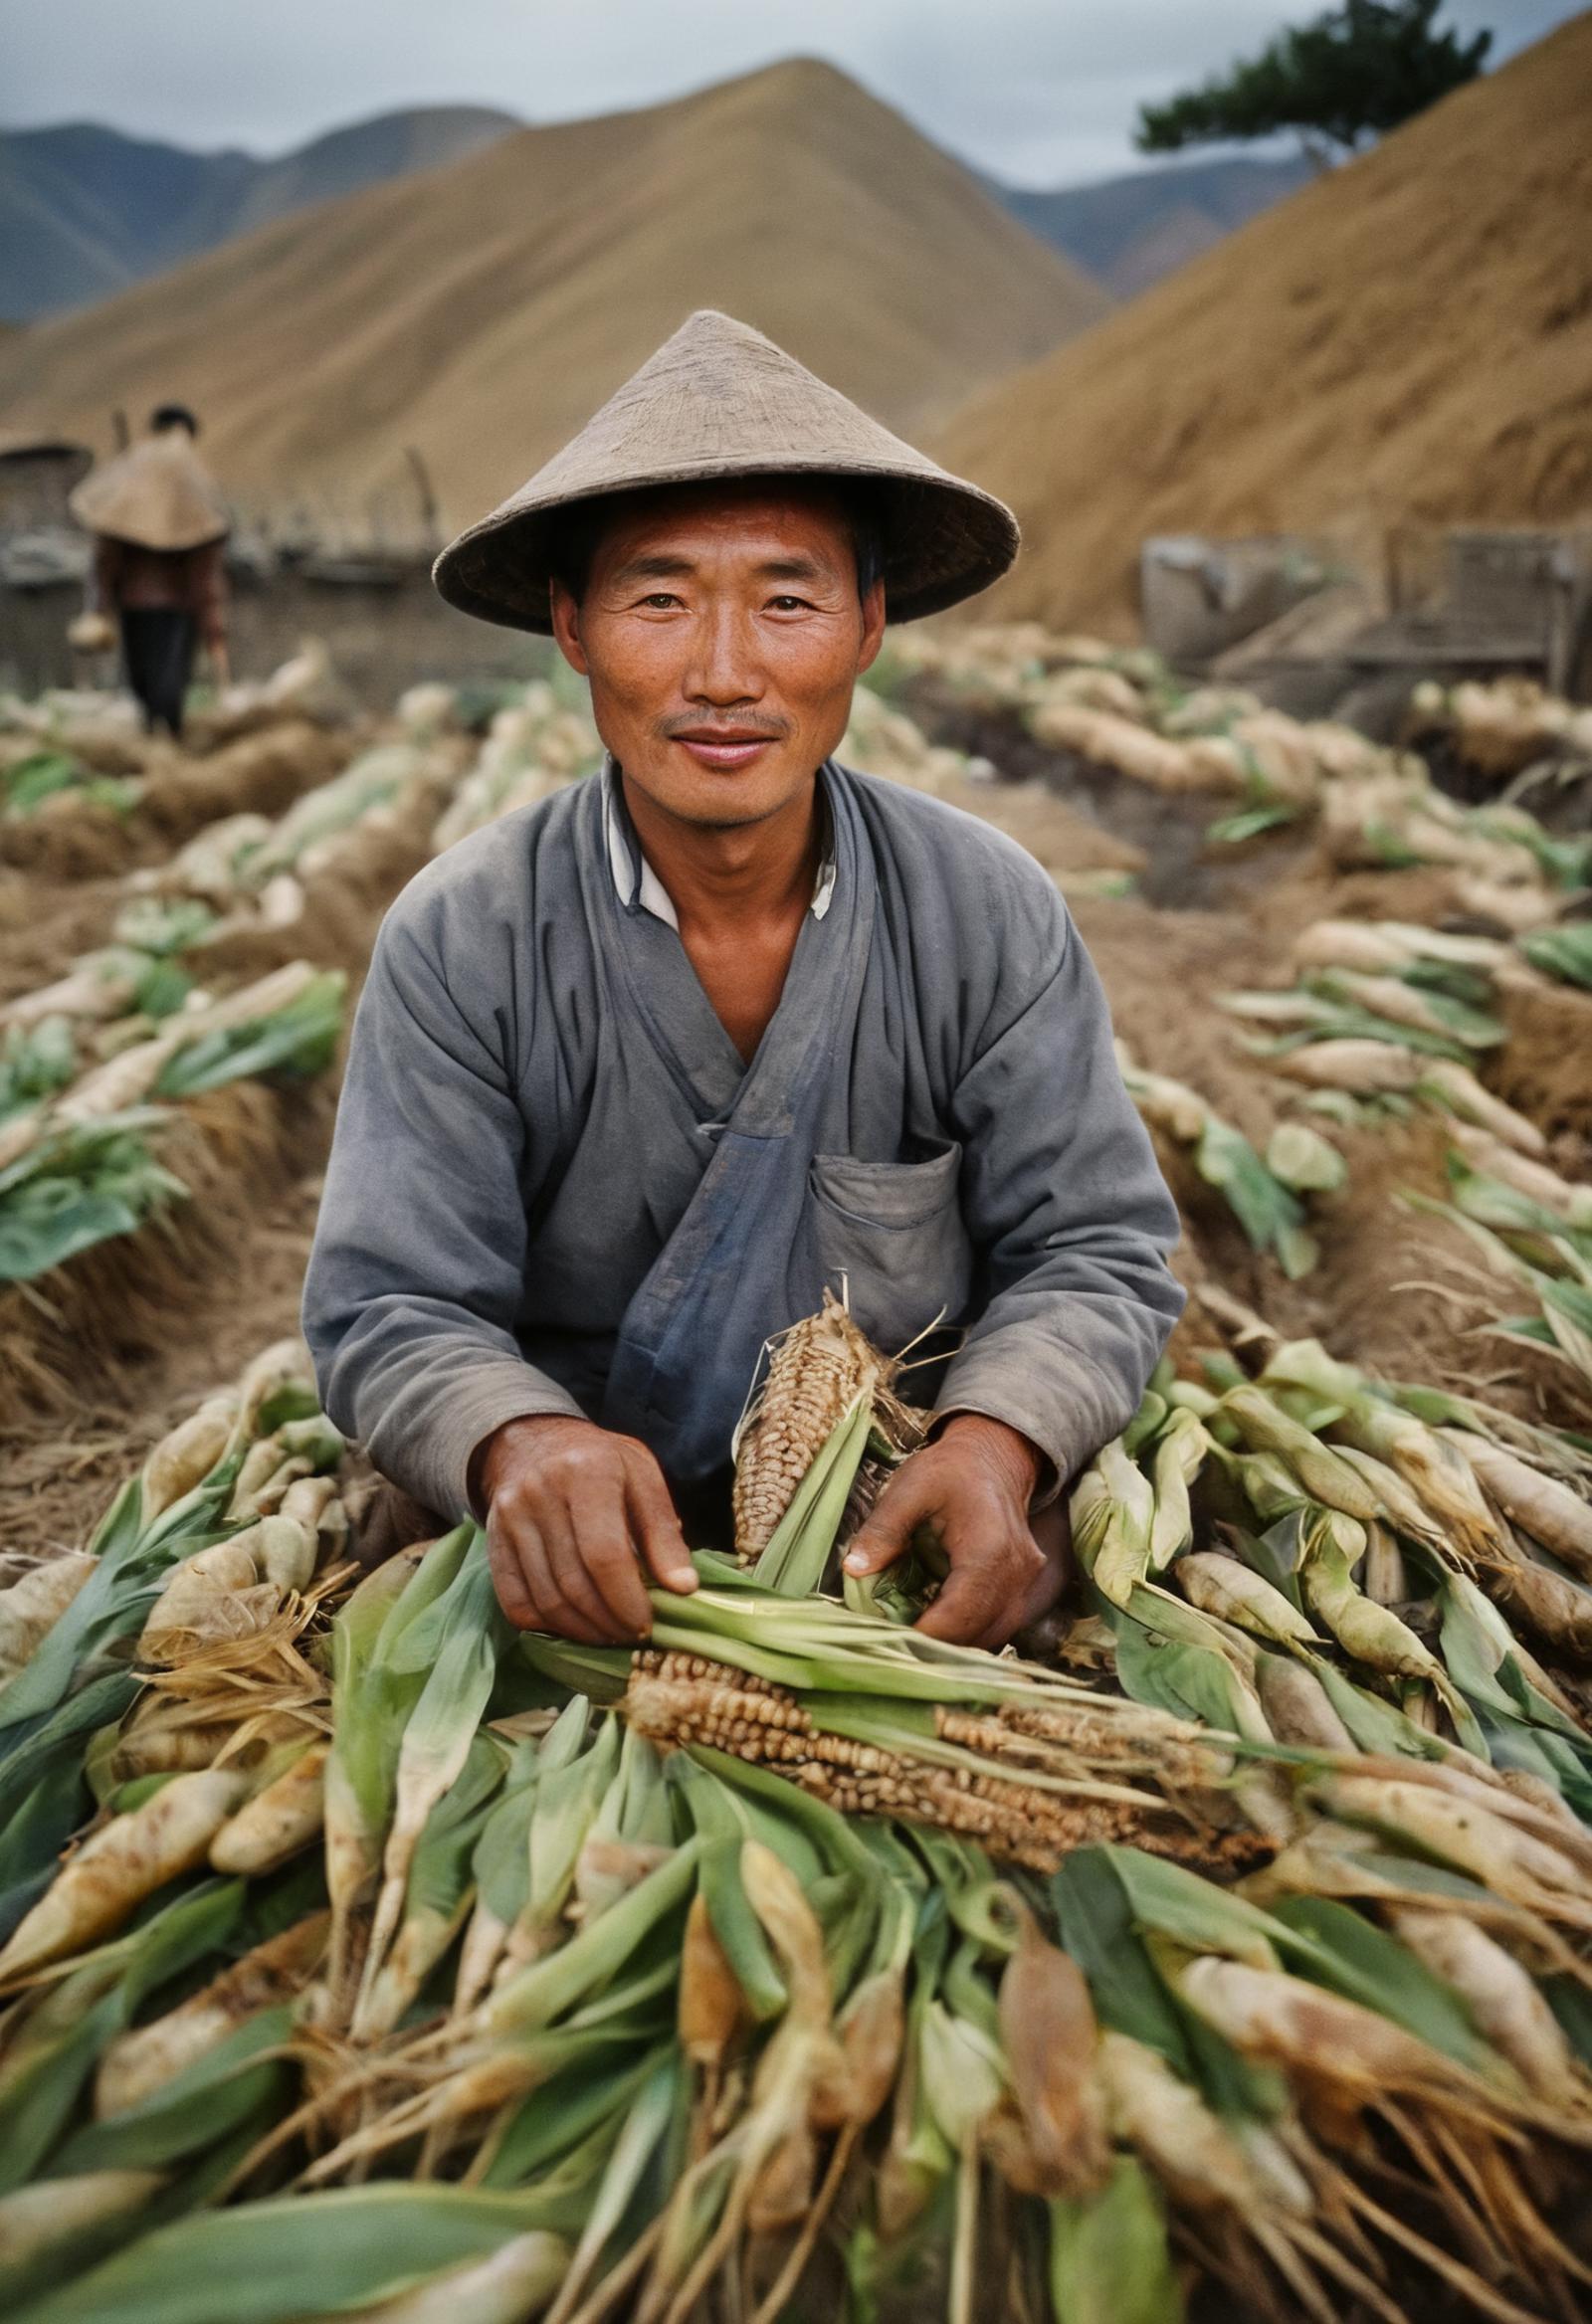 Man sitting in a field with a straw hat and a large pile of corn.